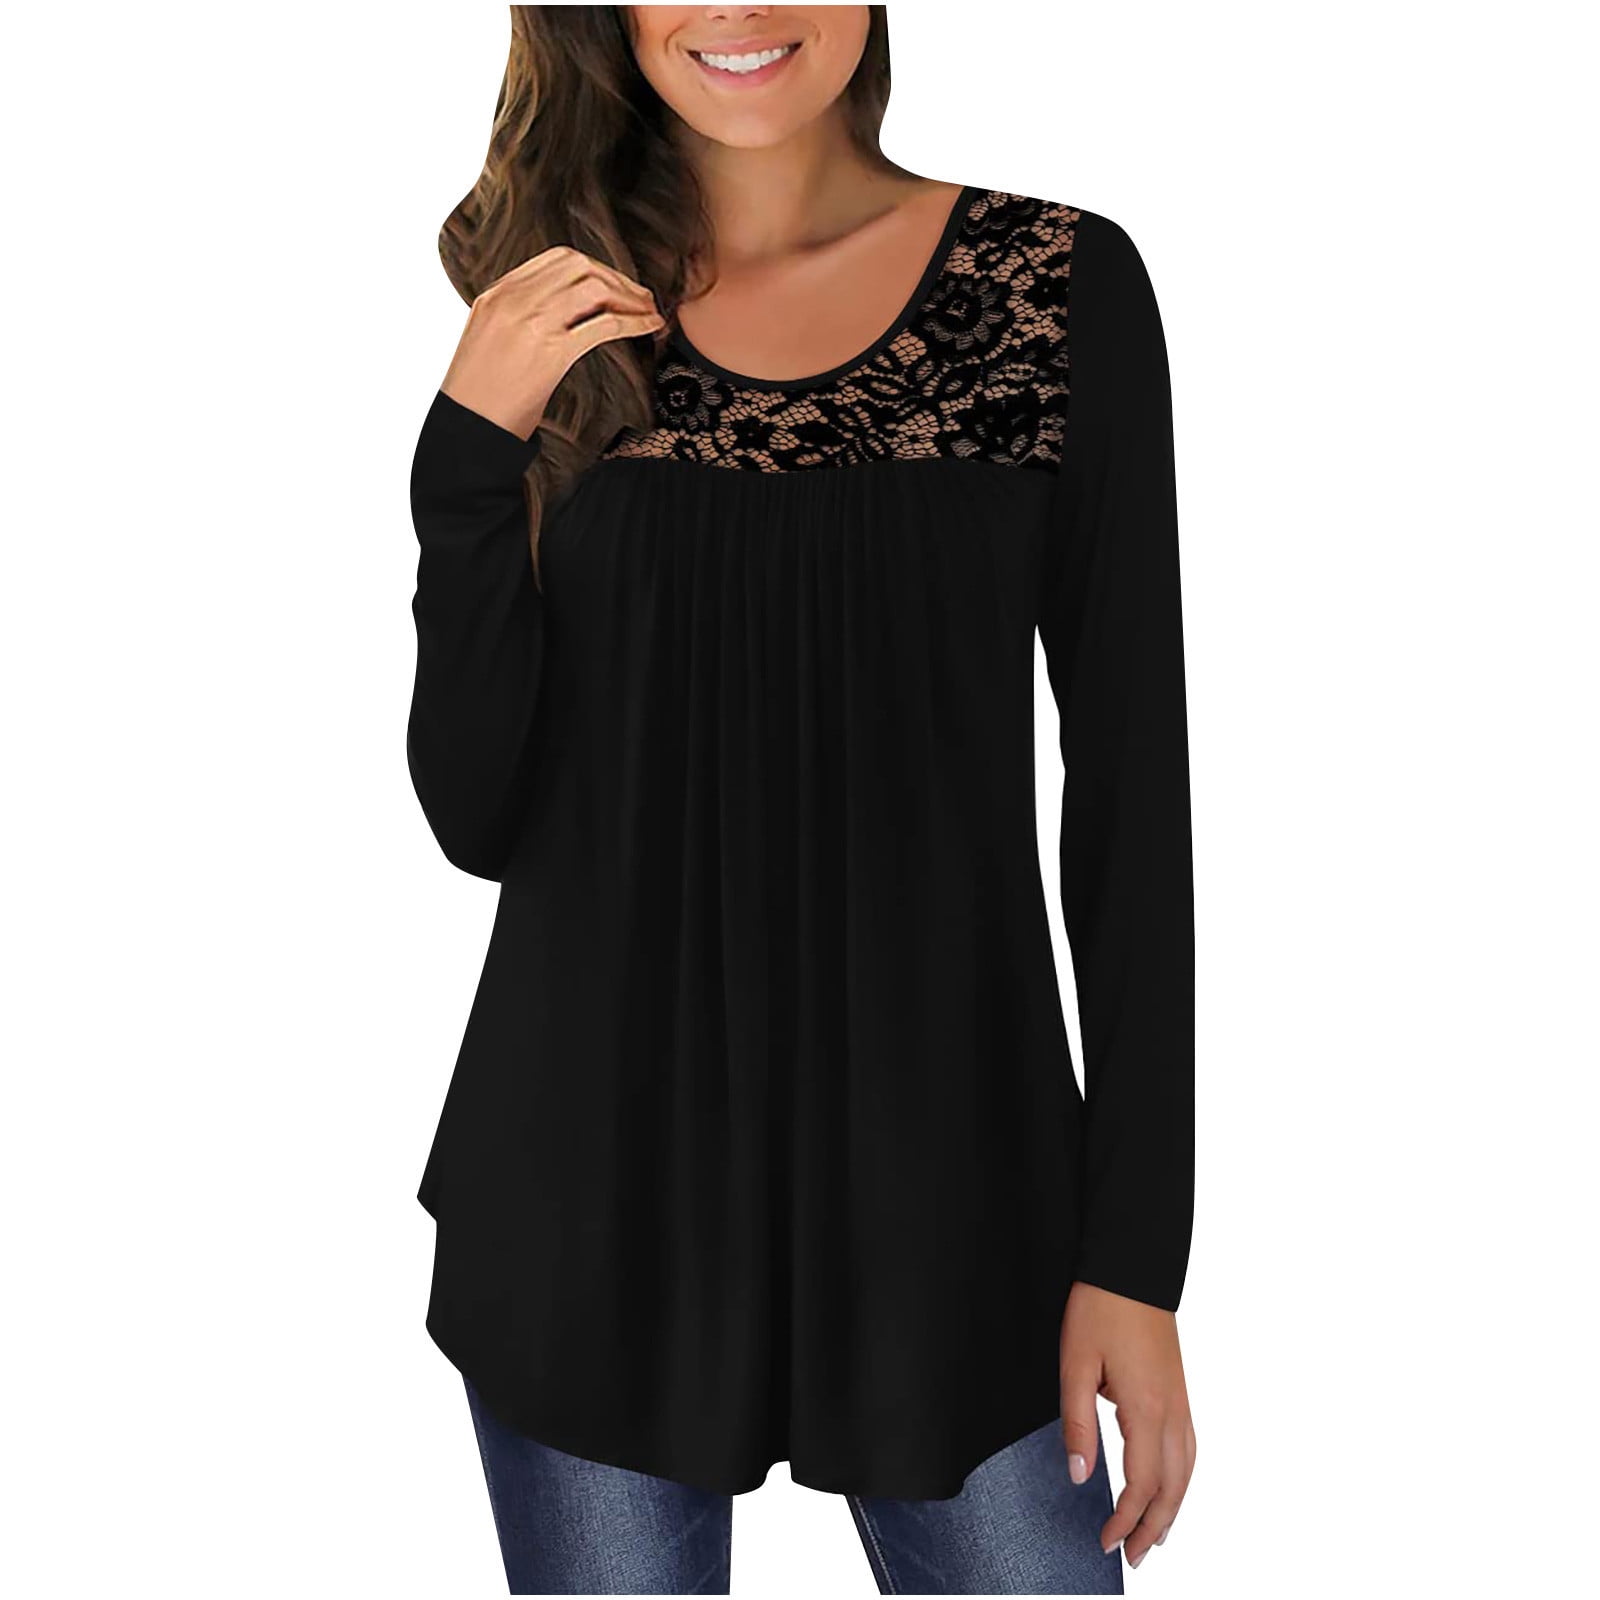 Tunic Tops to Wear with Leggings Dressy Plus Size Tops for Women Comfy  Flowy Pleated Long Shirt Henley Floral Printing Long Sleeve Shirts Black M